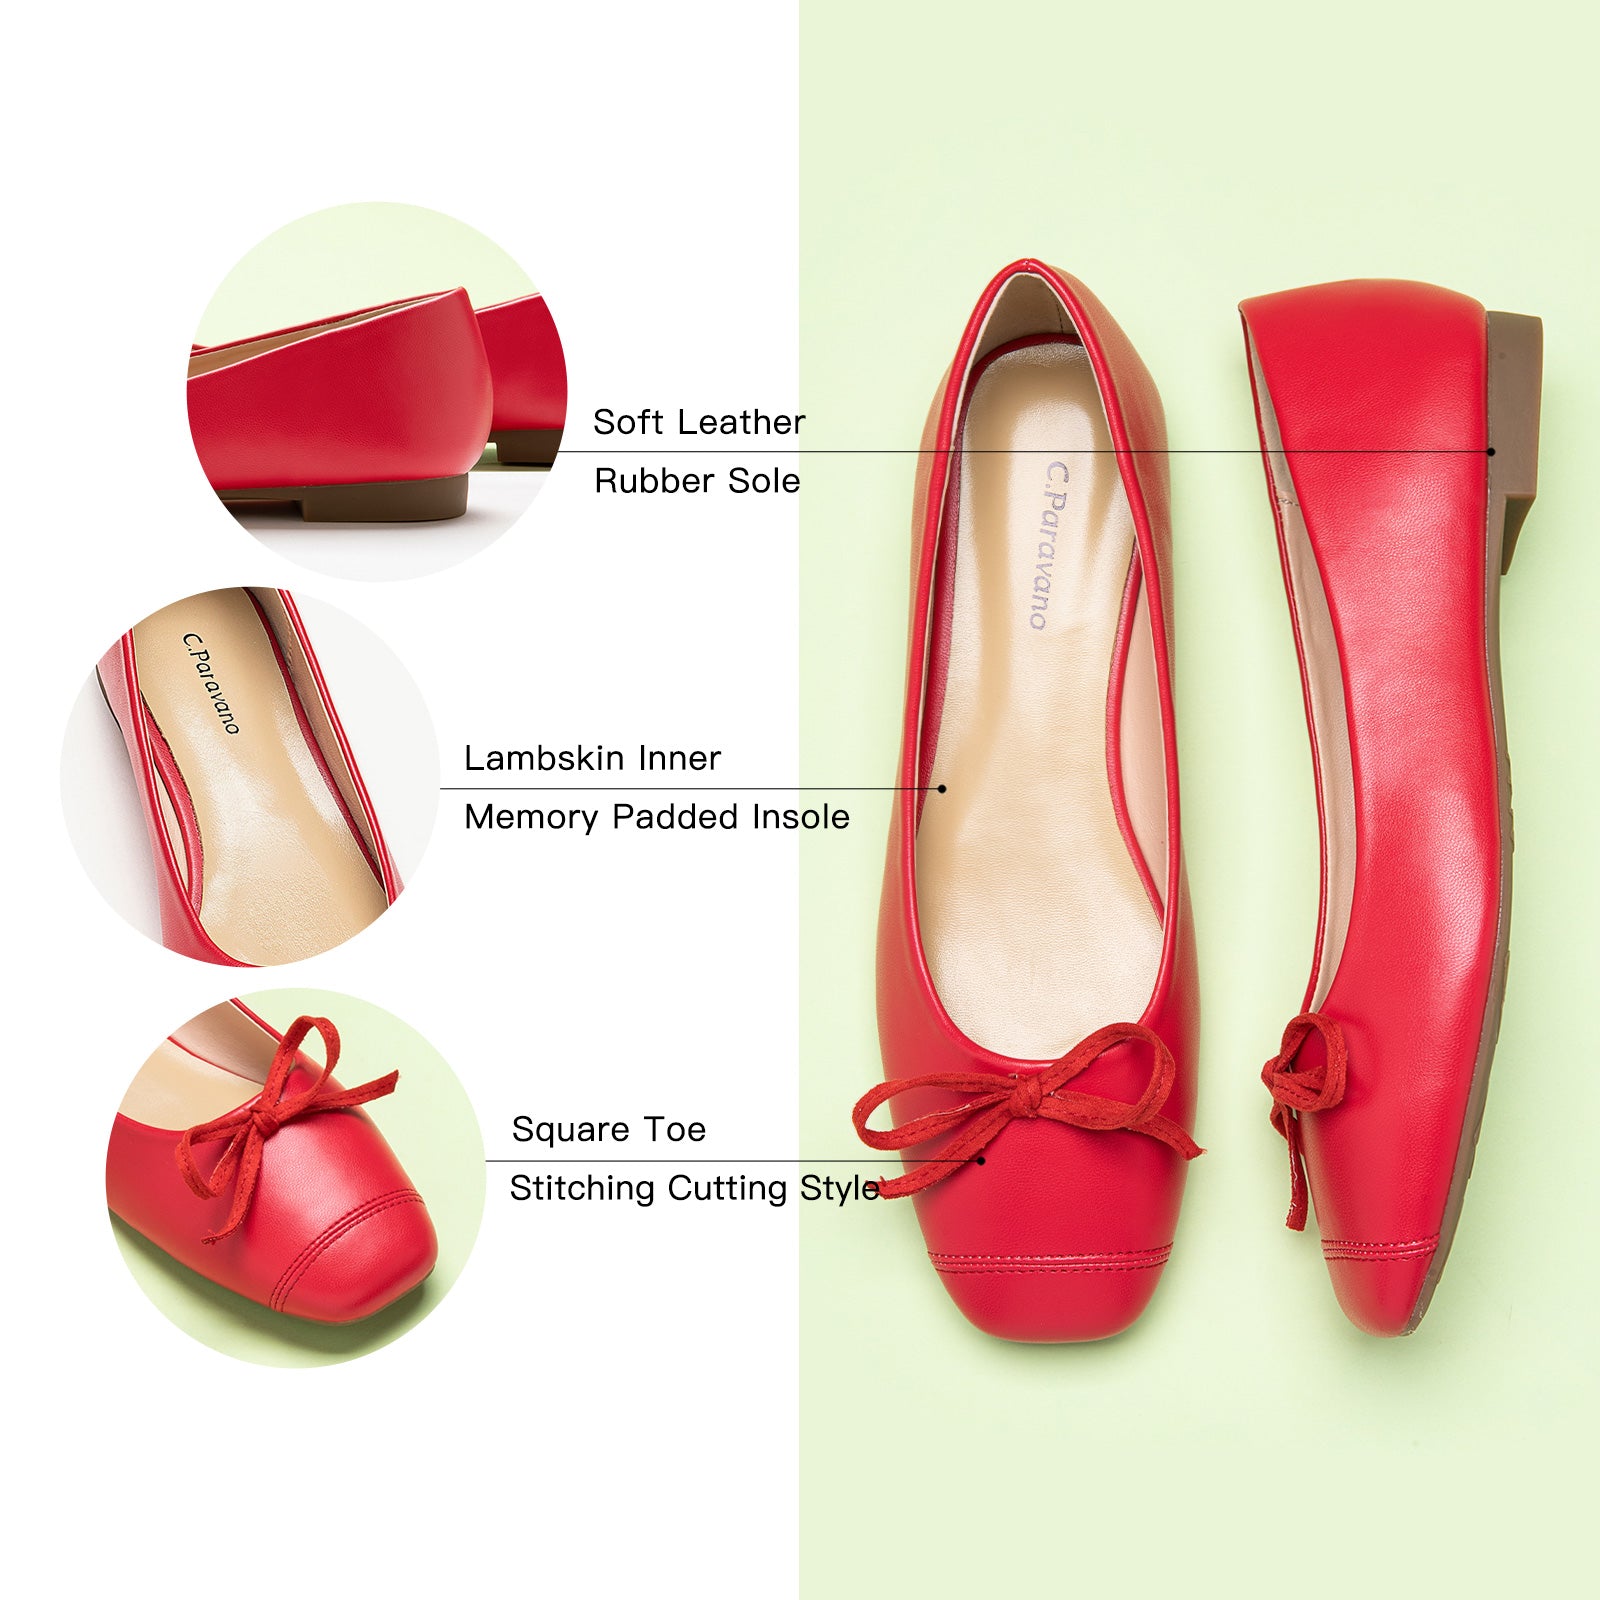 Suede Toe Bowknot Ballet Flats in Red, offering timeless style with a touch of sophistication for any occasion.